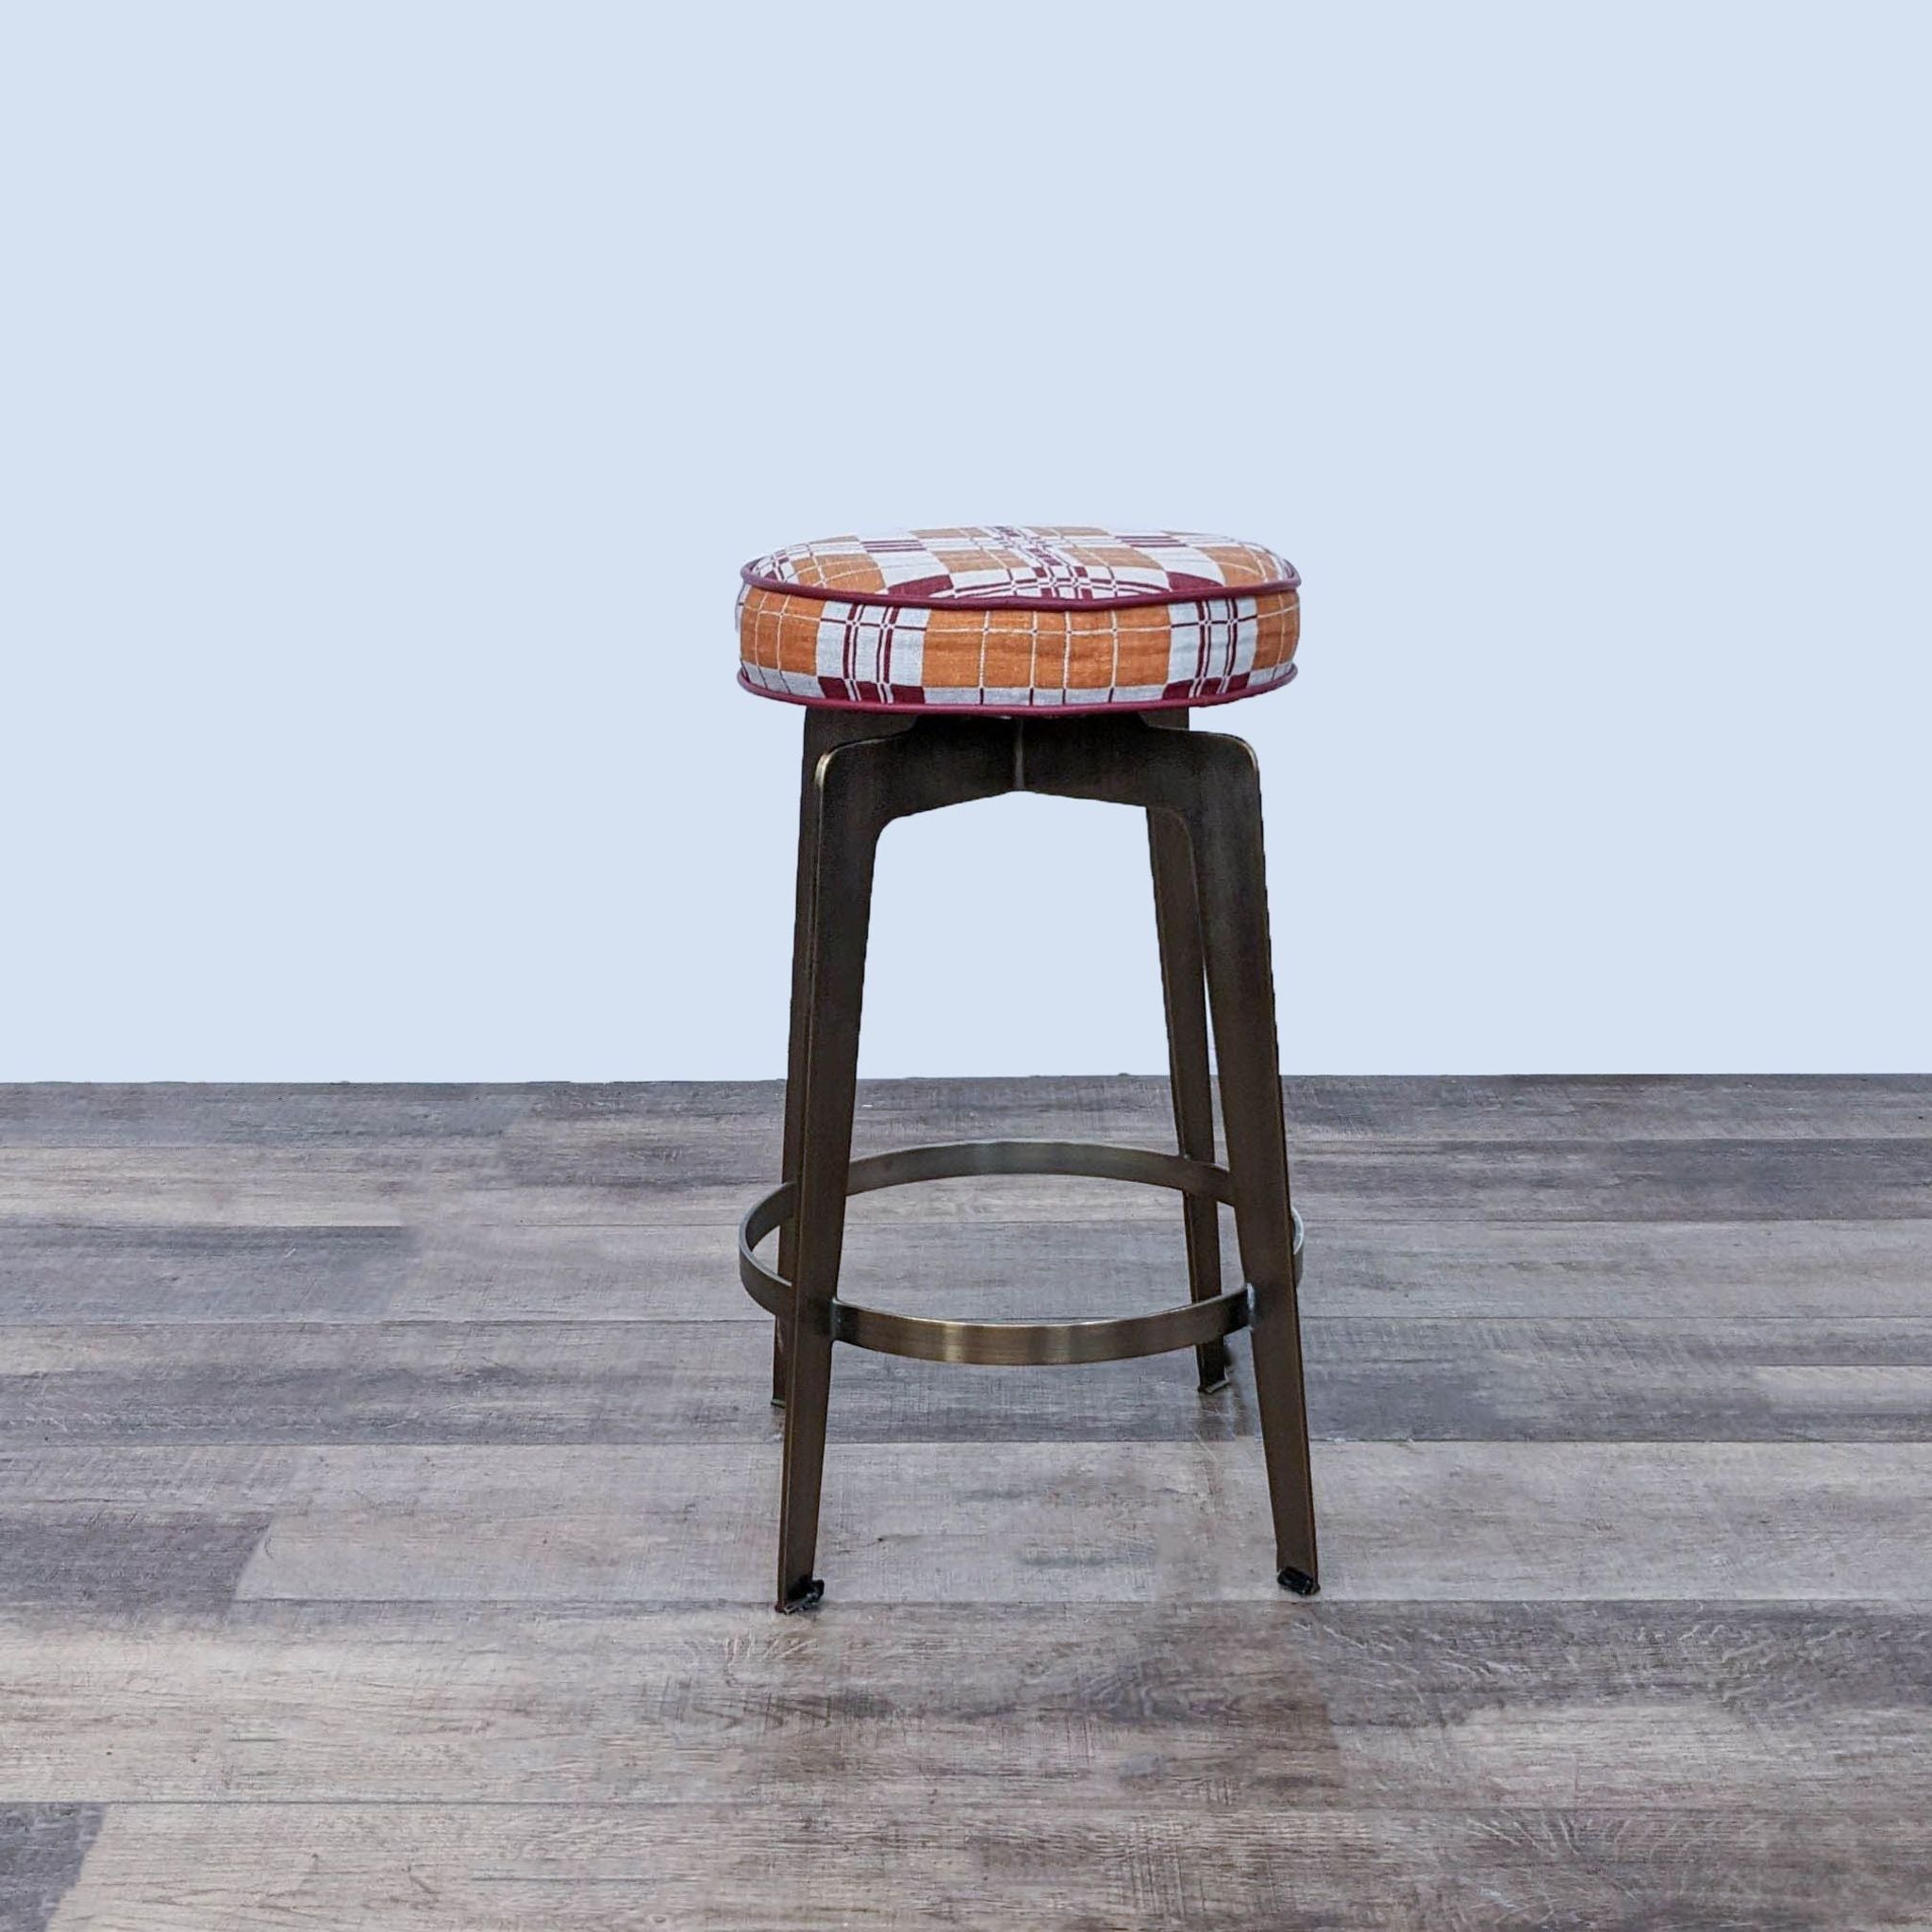 Reperch counter stool with a whimsical geometric-patterned fabric top and bronze metal frame.